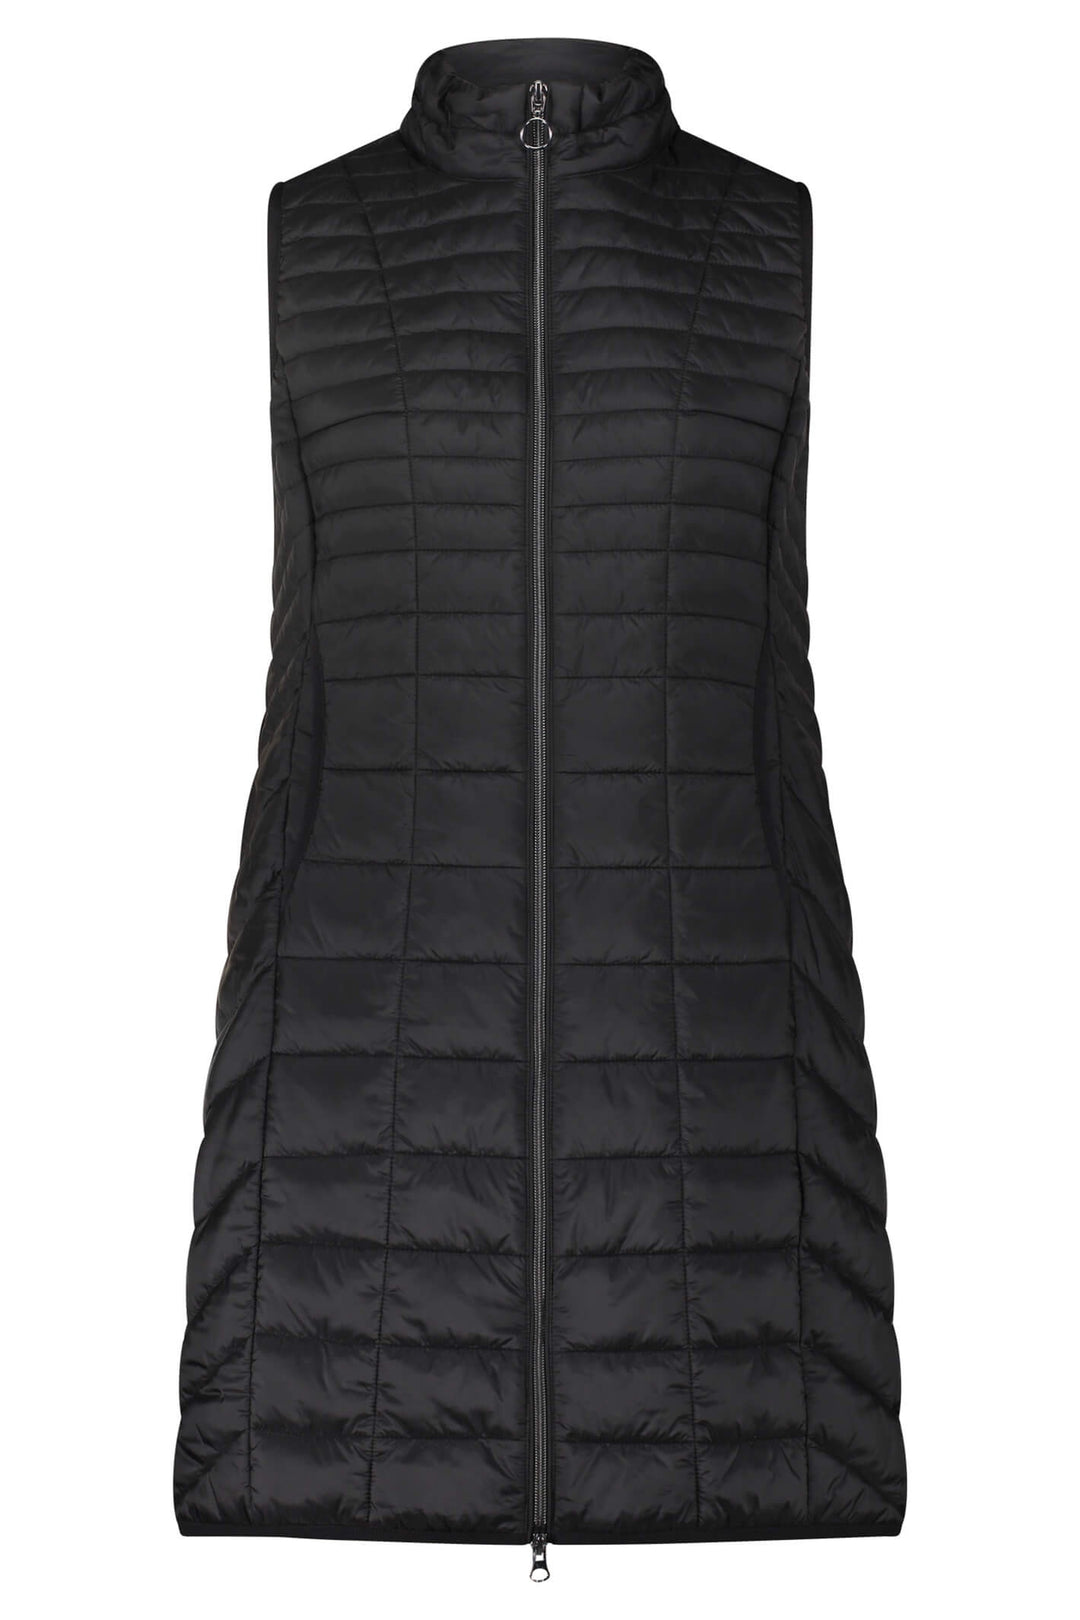 Betty Barclay 7197 1902 9045 Black Long Padded Gilet - Dotique Chesterfield